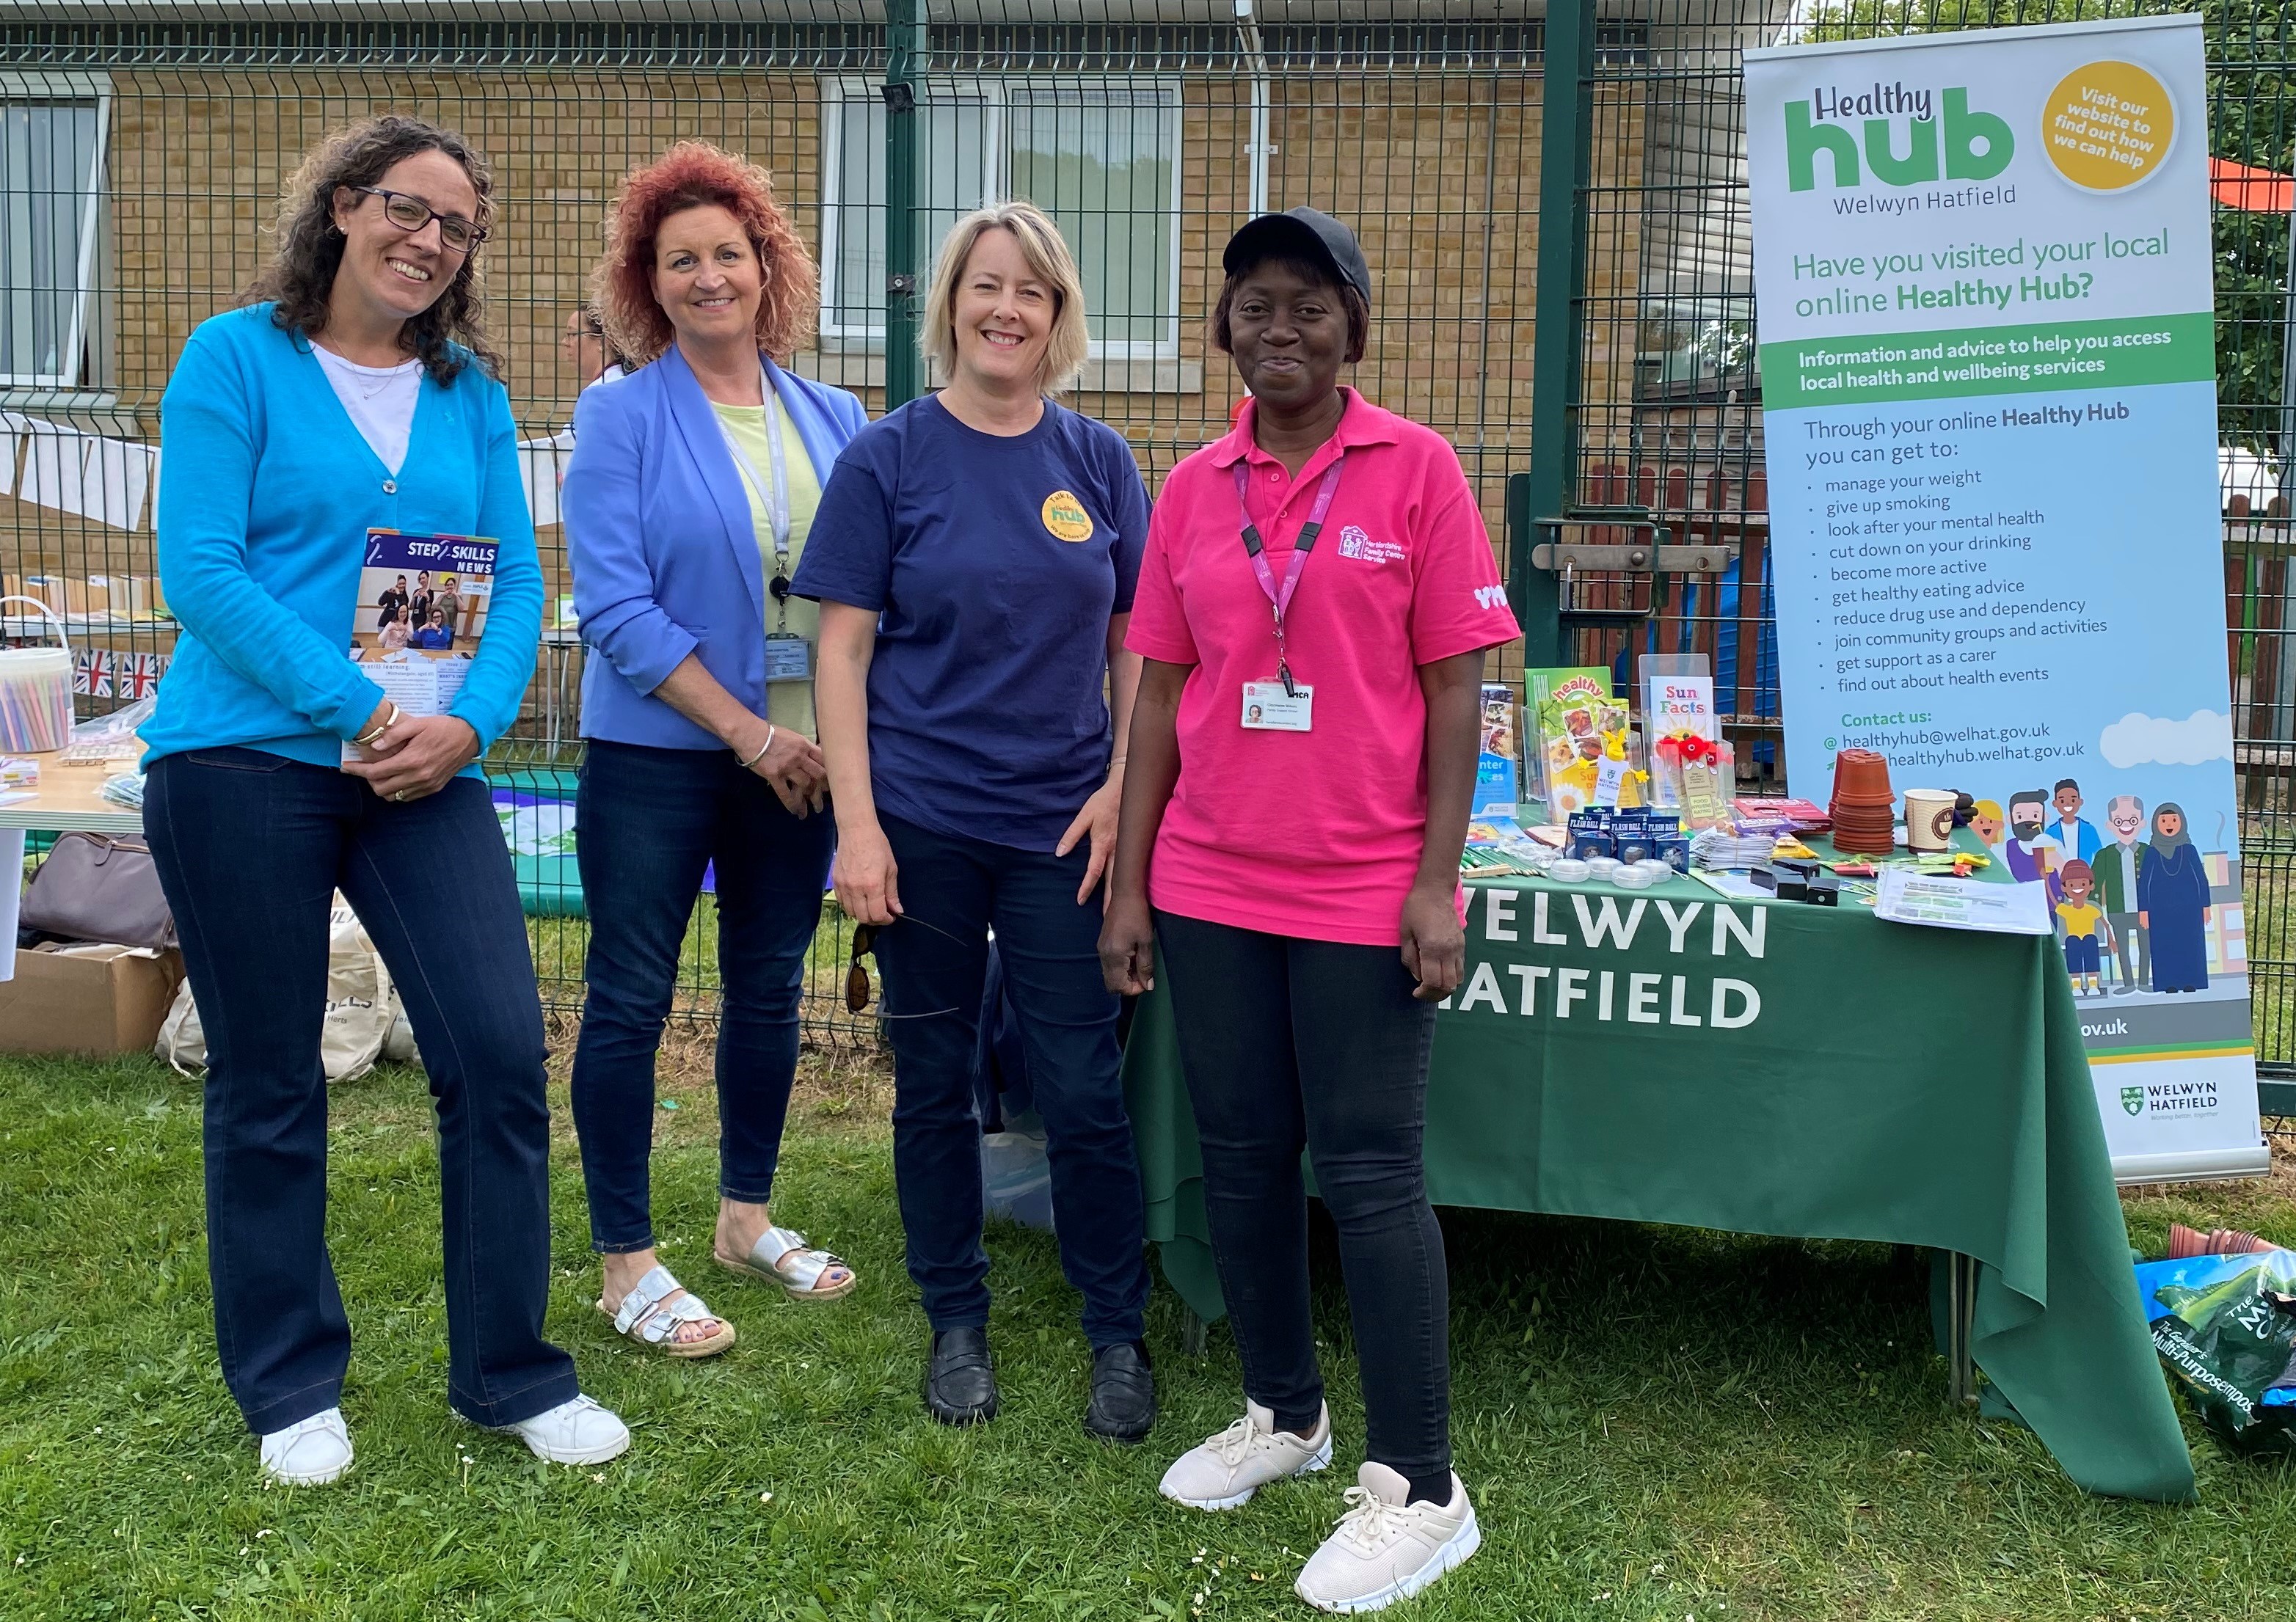 Group of ladies at a healthy hub stand